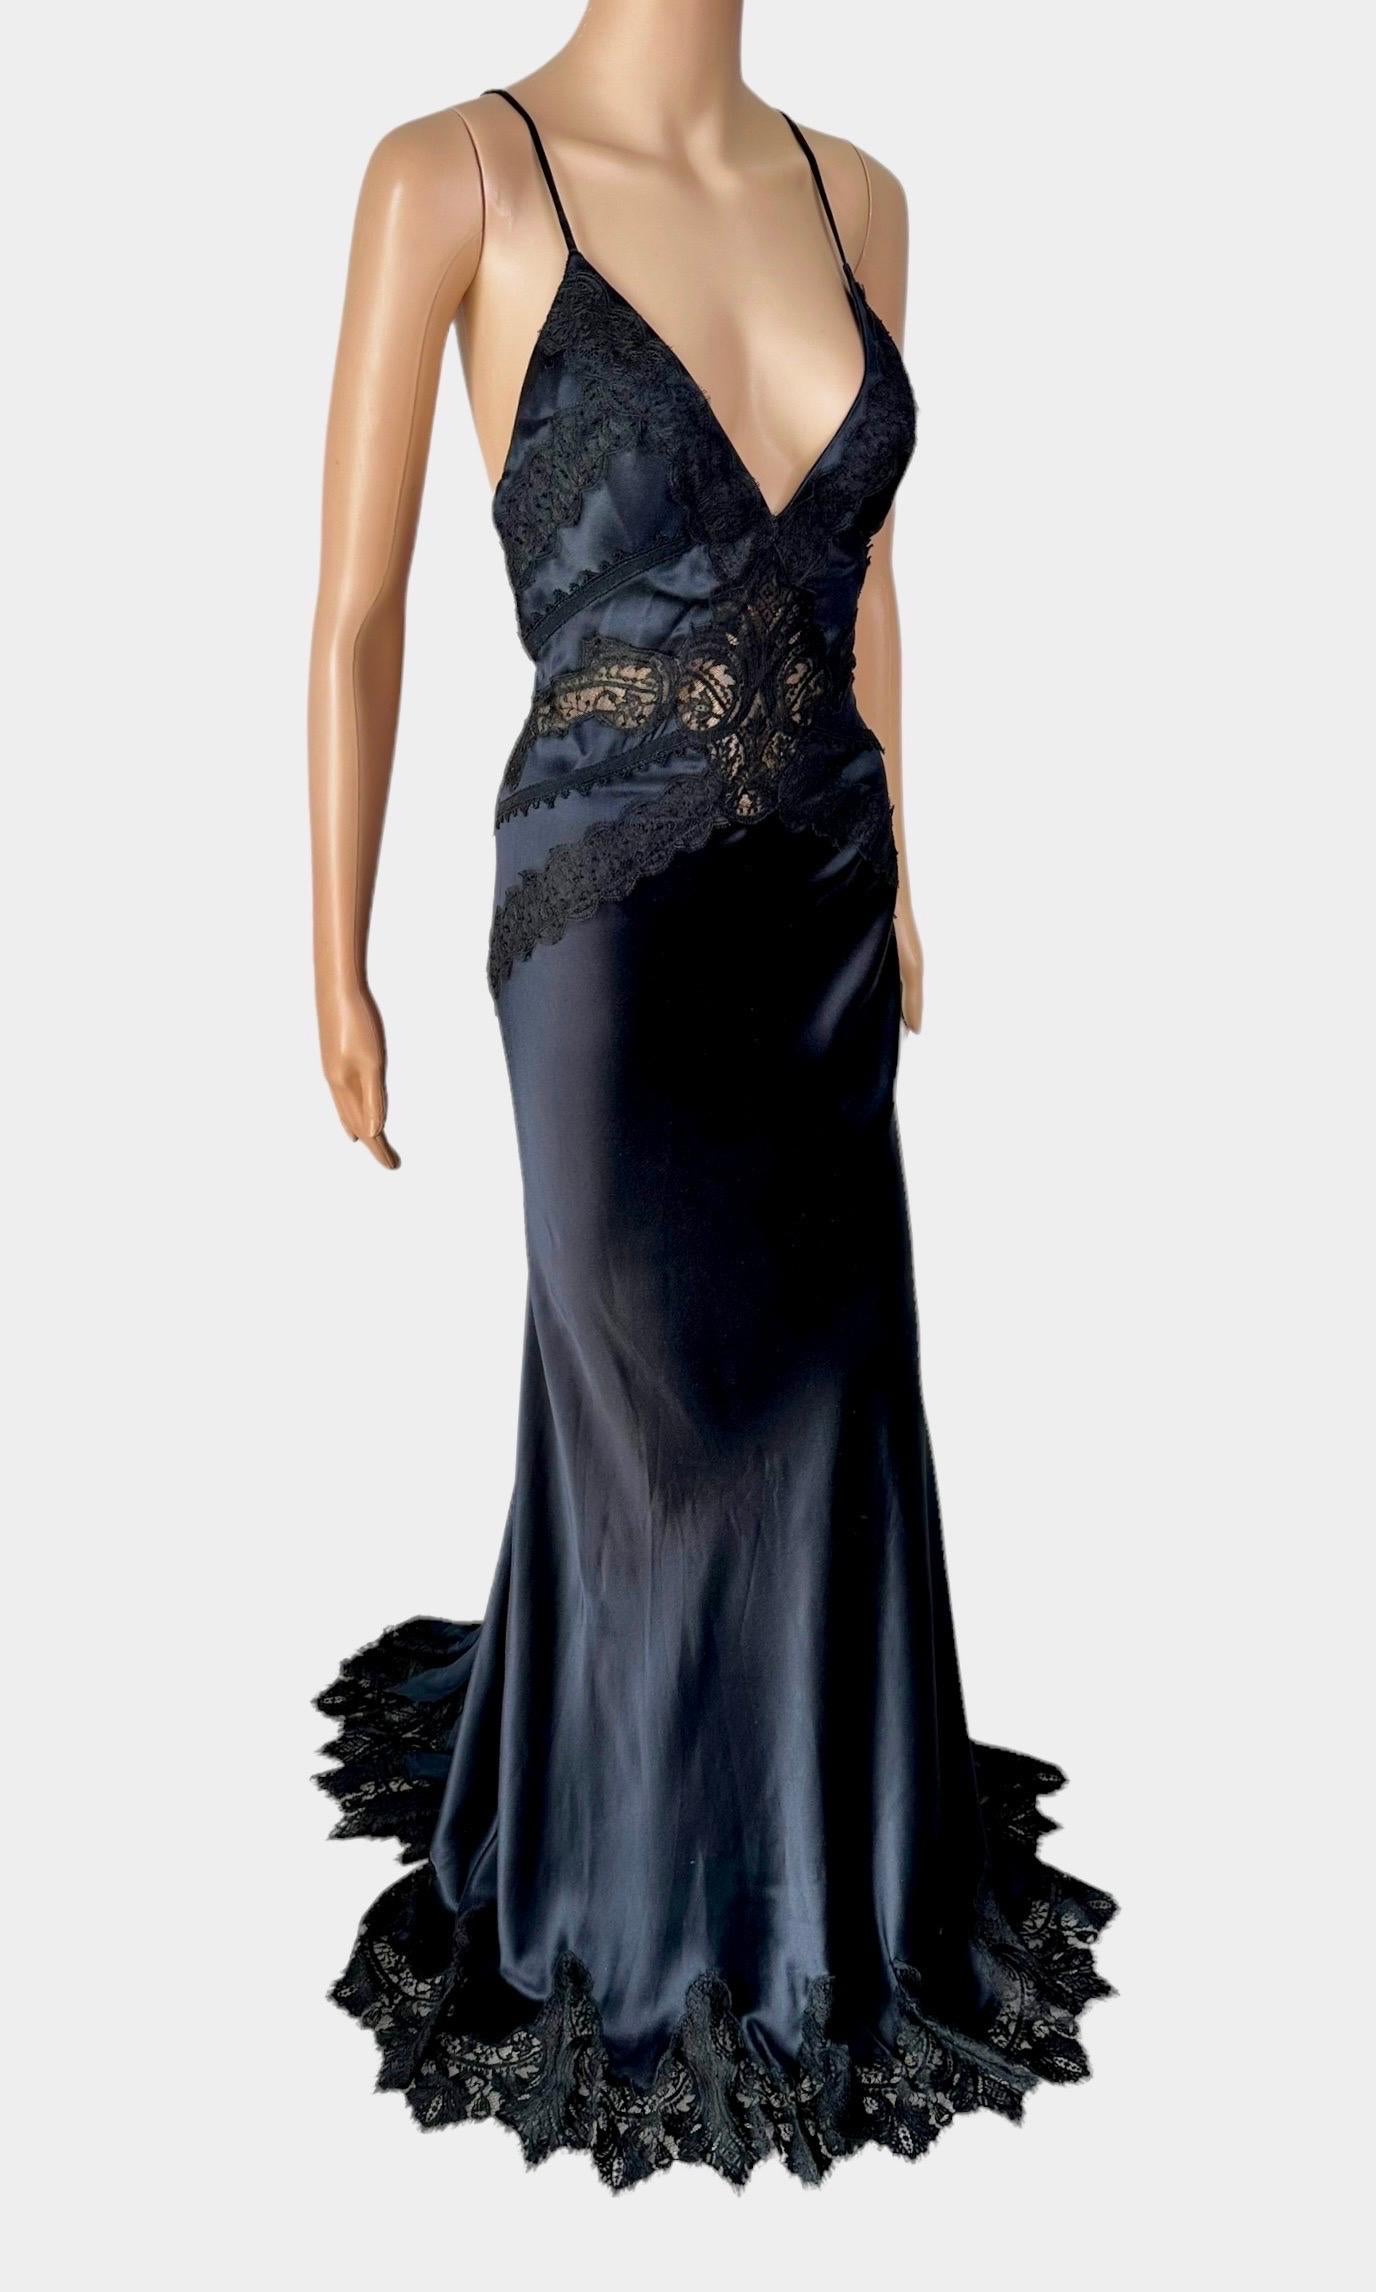 Versace c.2006 Plunging Neckline Sheer Lace Panels Backless Evening Dress Gown  2